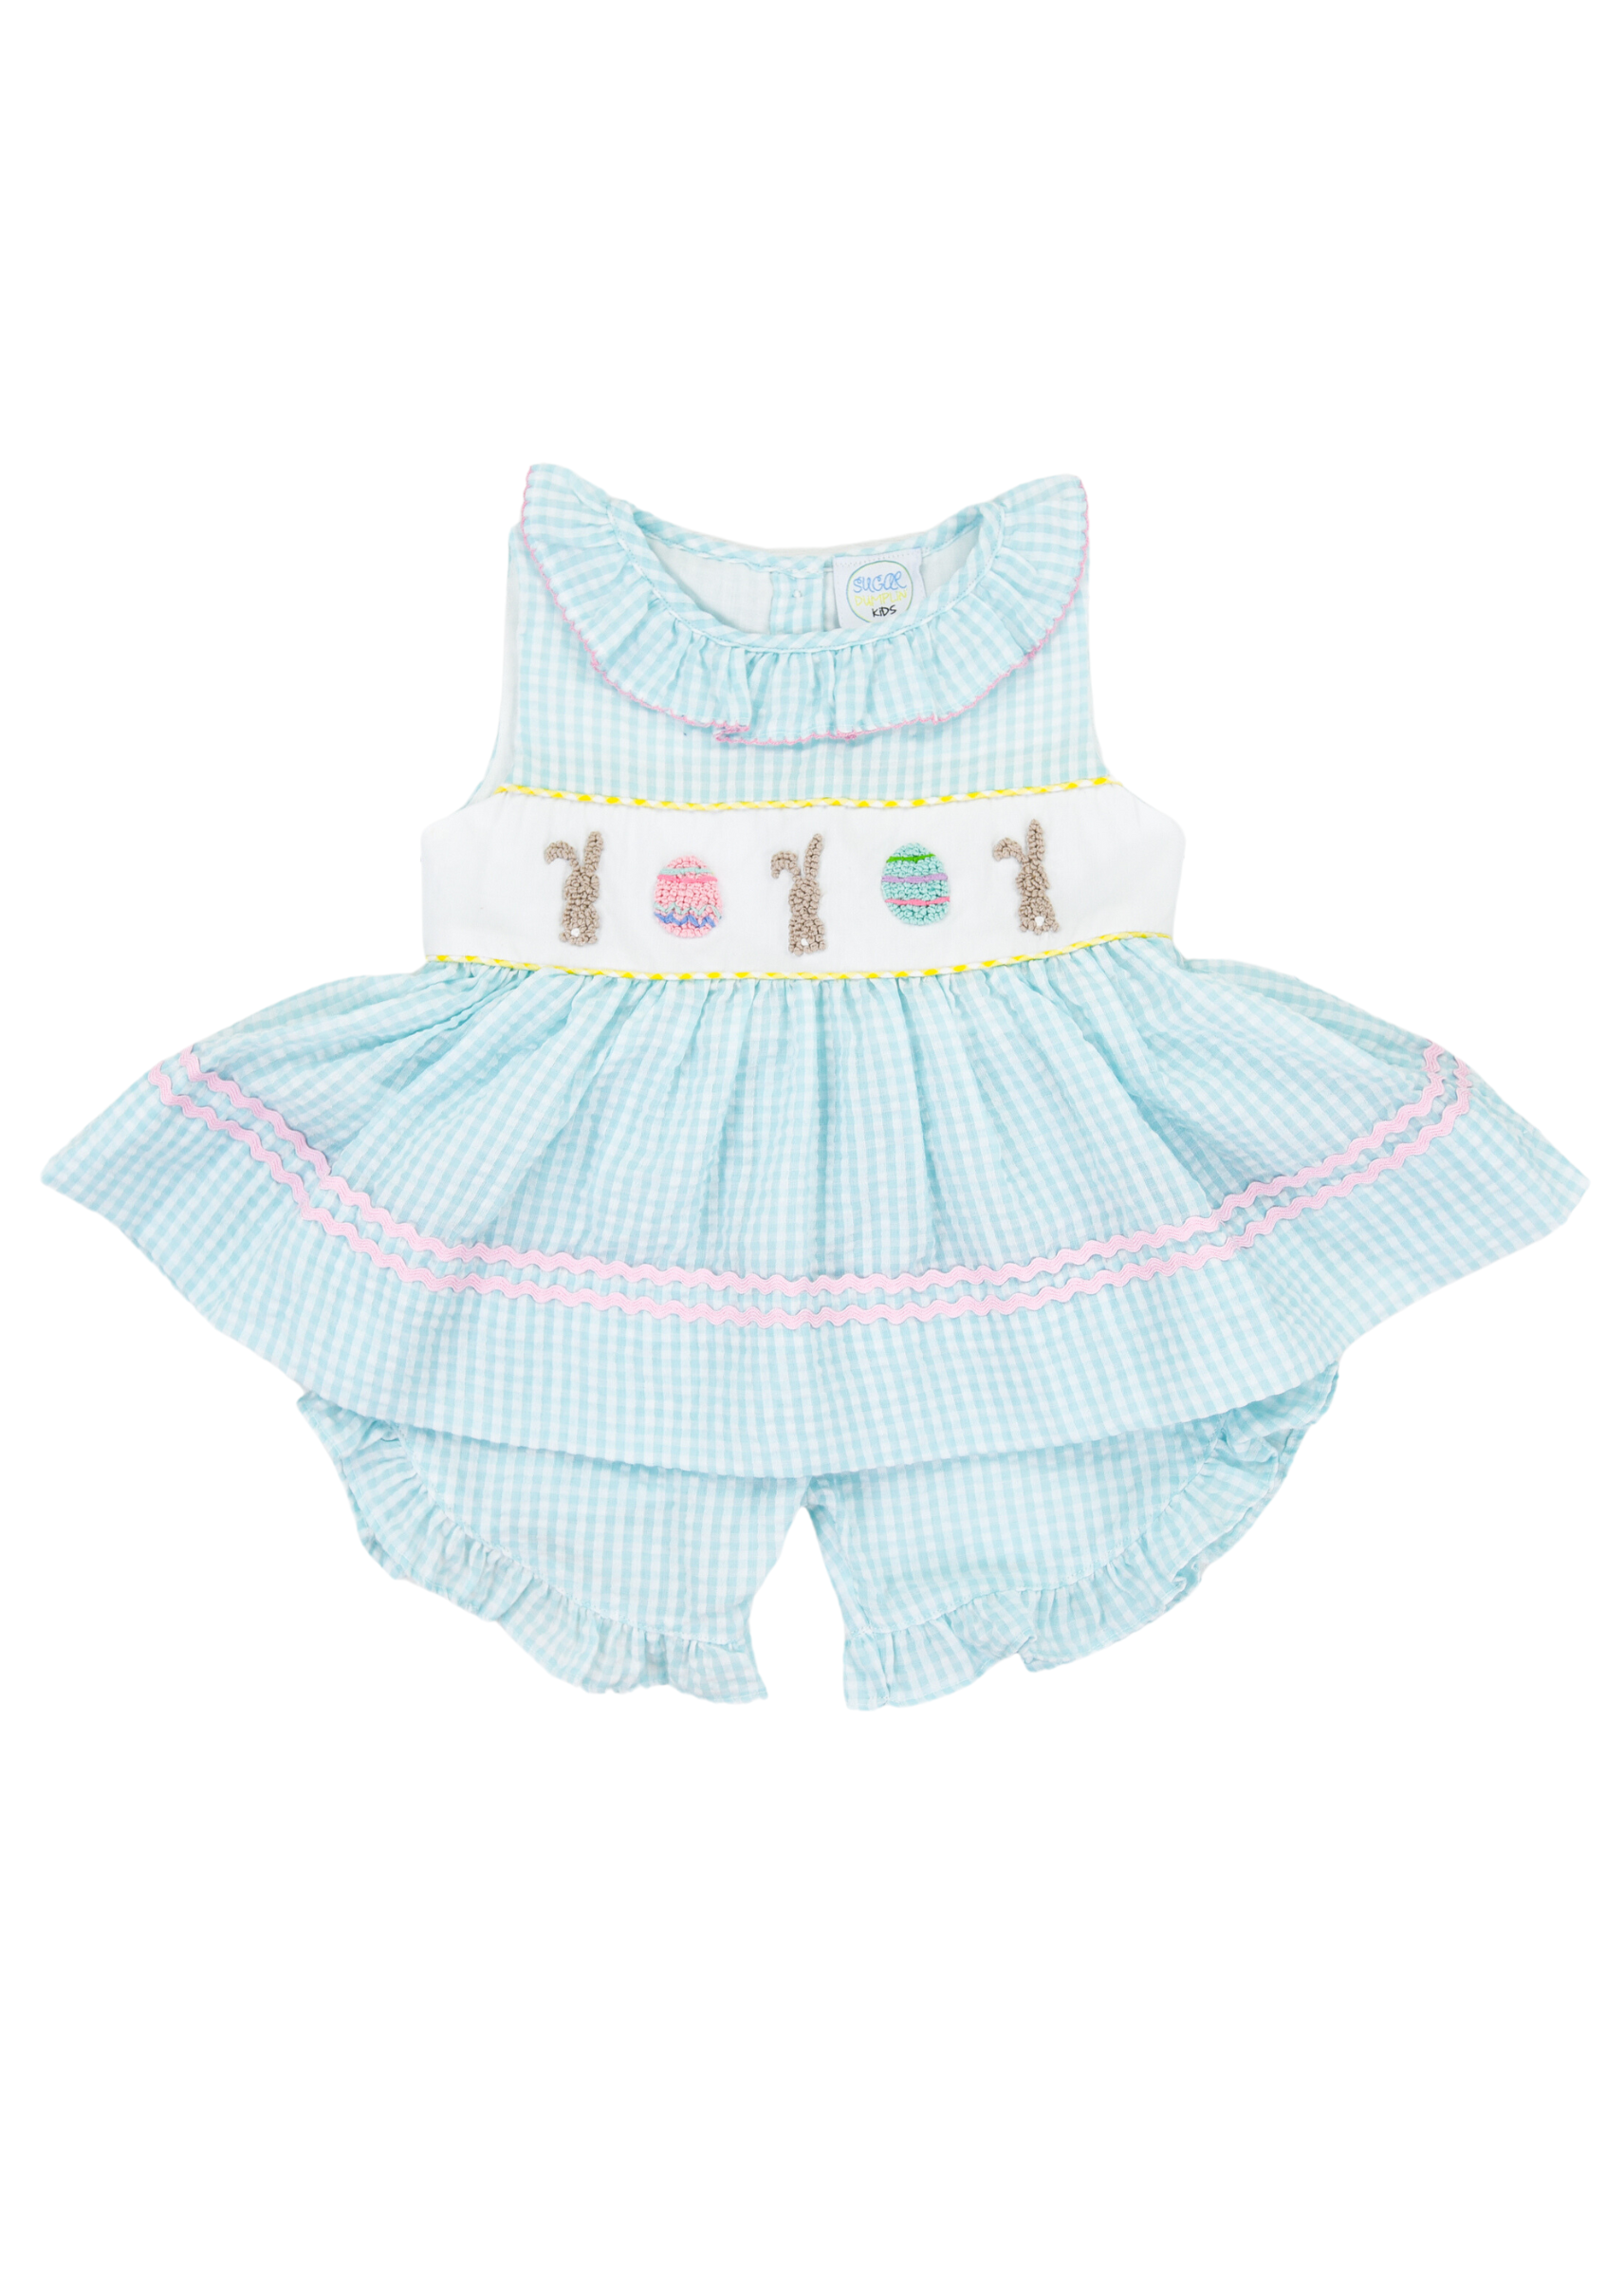 Girls French Knot Bunny and Egg Short Set